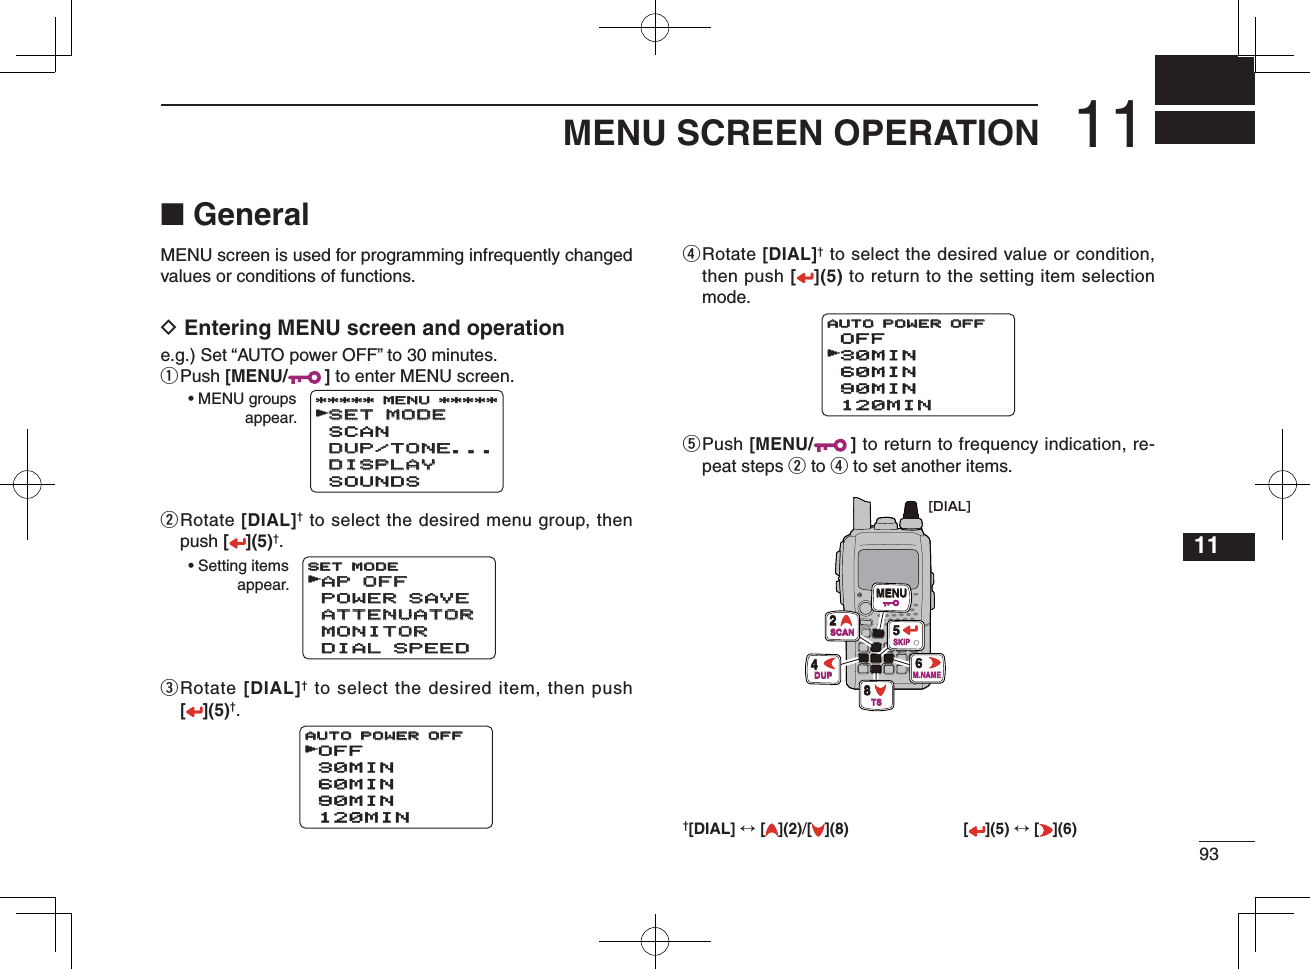 9311MENU SCREEN OPERATION12345678910111213141516171819■ GeneralMENU screen is used for programming infrequently changed values or conditions of functions.D Entering MENU screen and operatione.g.) Set “AUTO power OFF” to 30 minutes.q Push  [MENU/ ] to enter MENU screen.w  Rotate [DIAL]† to select the desired menu group, then push [](5)†.e  Rotate [DIAL]† to select the desired item, then push [](5)†.r  Rotate [DIAL]† to select the desired value or condition, then push [](5) to return to the setting item selection mode.t  Push [MENU/ ] to return to frequency indication, re-peat steps w to r to set another items.SET MODESET MODESCANDUP/TONE...DUP/TONE...DISPLAYDISPLAYSOUNDS***** MENU ********** MENU *****r• MENU groupsappear.AP OFFAP OFFPOWER SAVEPOWER SAVEATTENUATORATTENUATORMONITORMONITORDIAL SPEEDDIAL SPEEDSET MODESET MODEr• Setting itemsappear.OFF30MIN60MIN90MIN120MINAUTO POWER OFFAUTO POWER OFFrOFF30MIN60MIN90MIN120MIN120MINAUTO POWER OFFAUTO POWER OFFr[DIAL]MENU2SCAN8TS4DUP6M.NAME5SKIP†[DIAL] ↔ [ ](2)/[](8) [ ](5) ↔ [ ](6)